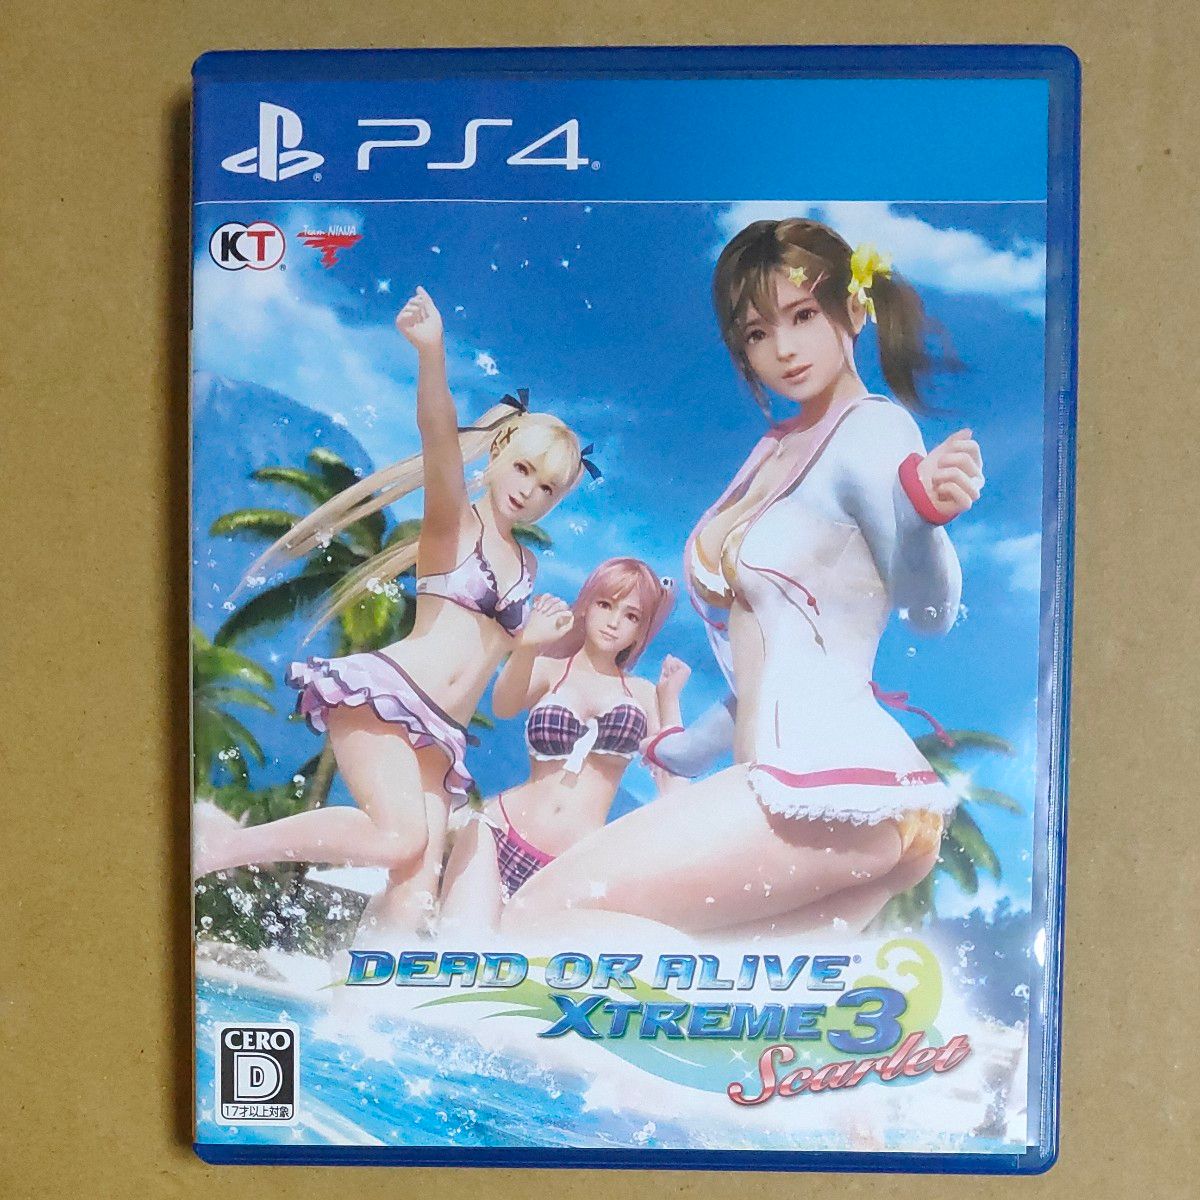 【PS4】 DEAD OR ALIVE Xtreme 3 Scarlet [通常版]　デッドオアアライブ